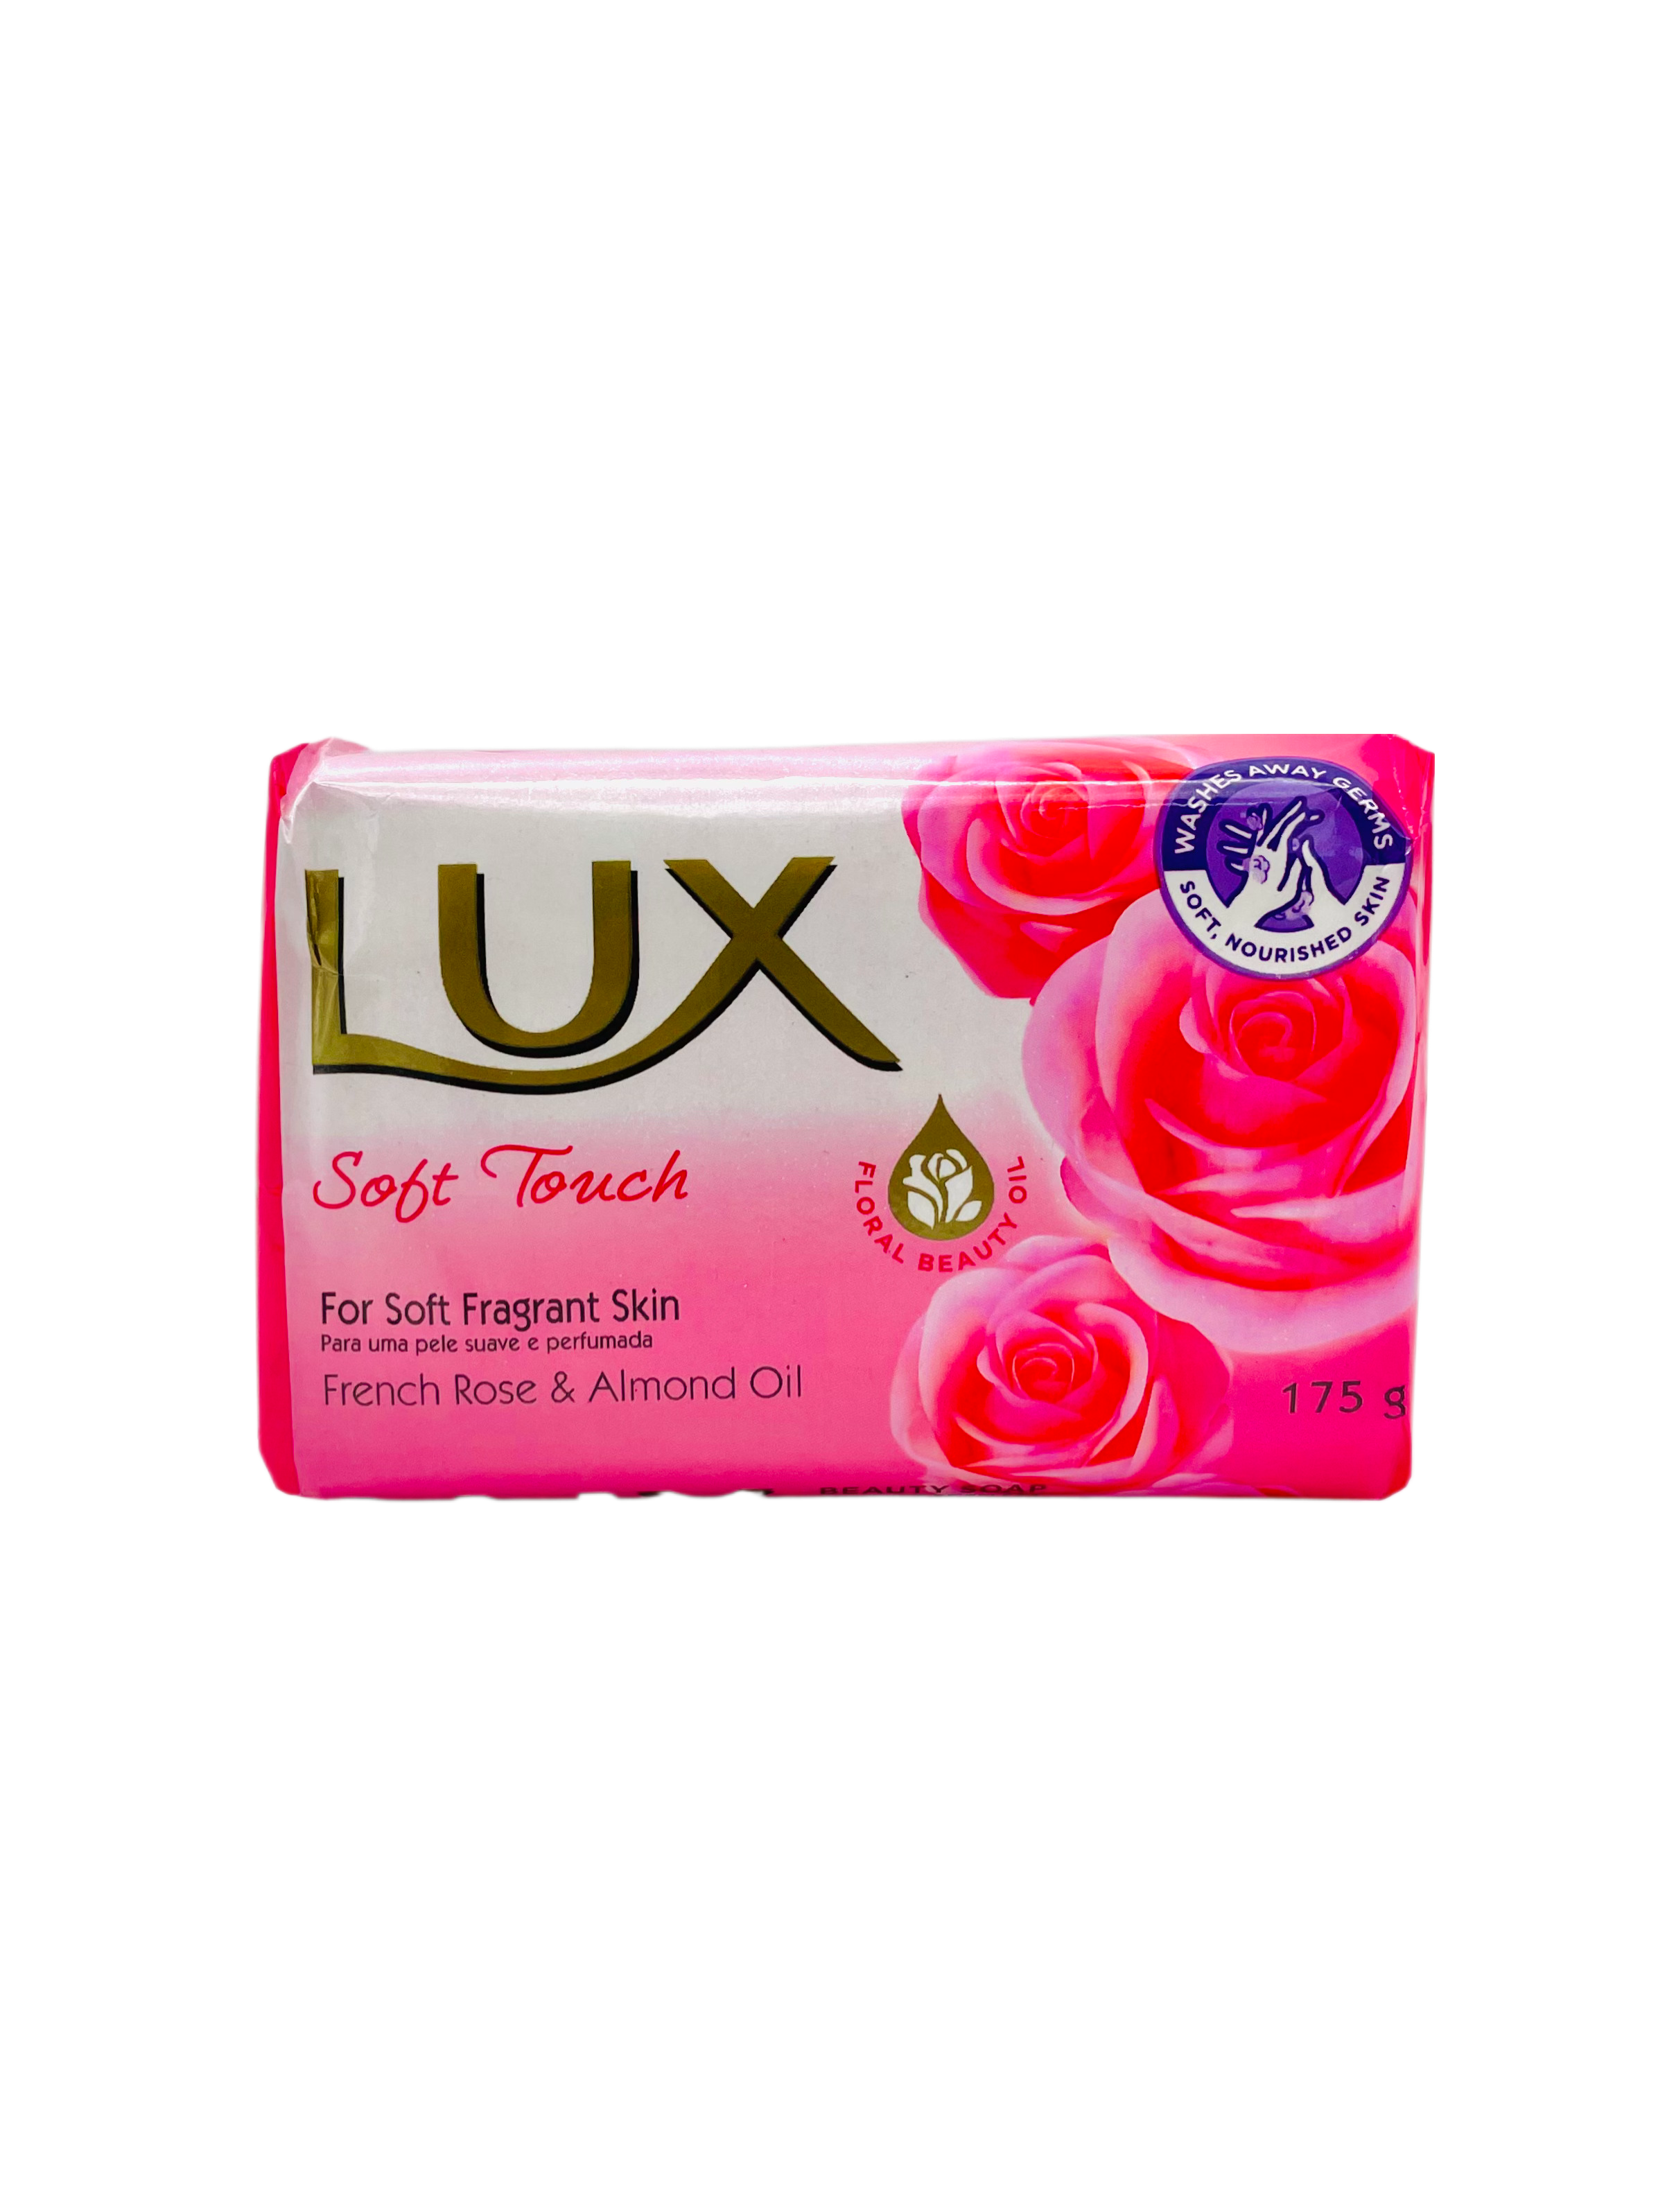 Lux - Soft touch 175g